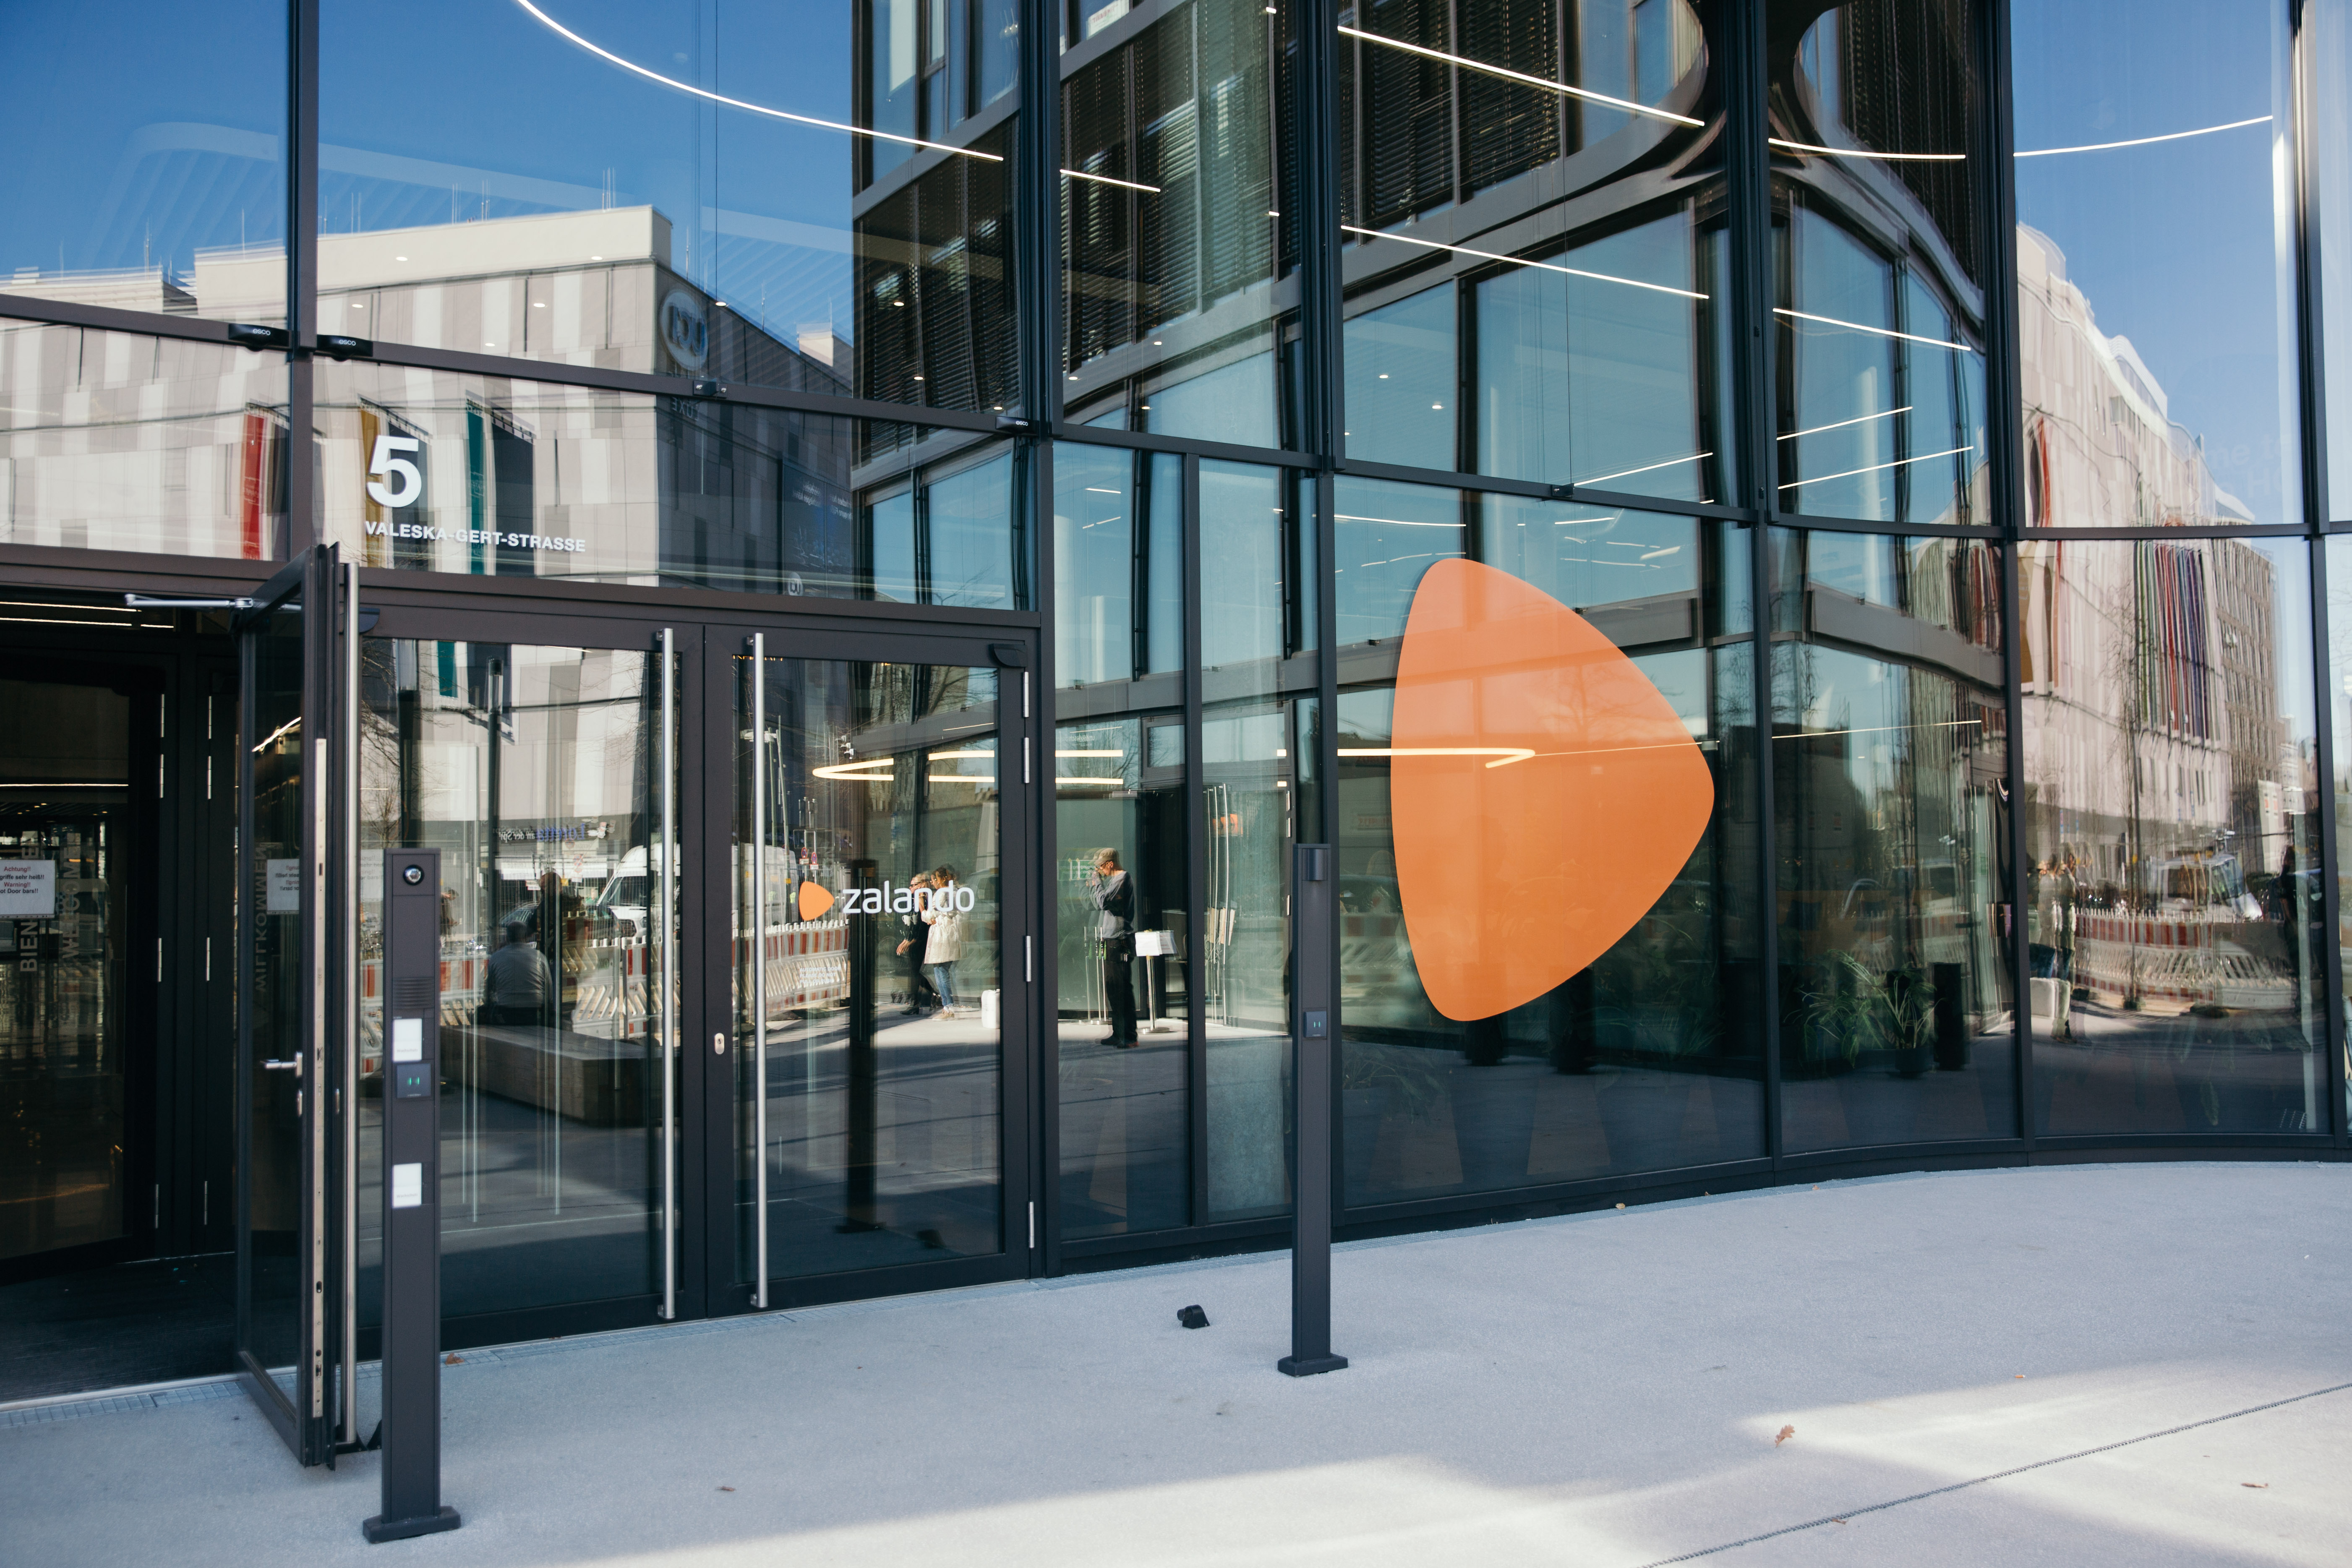 Entrance of Zalando Headquarter, other buildings are mirrored in the glass facade